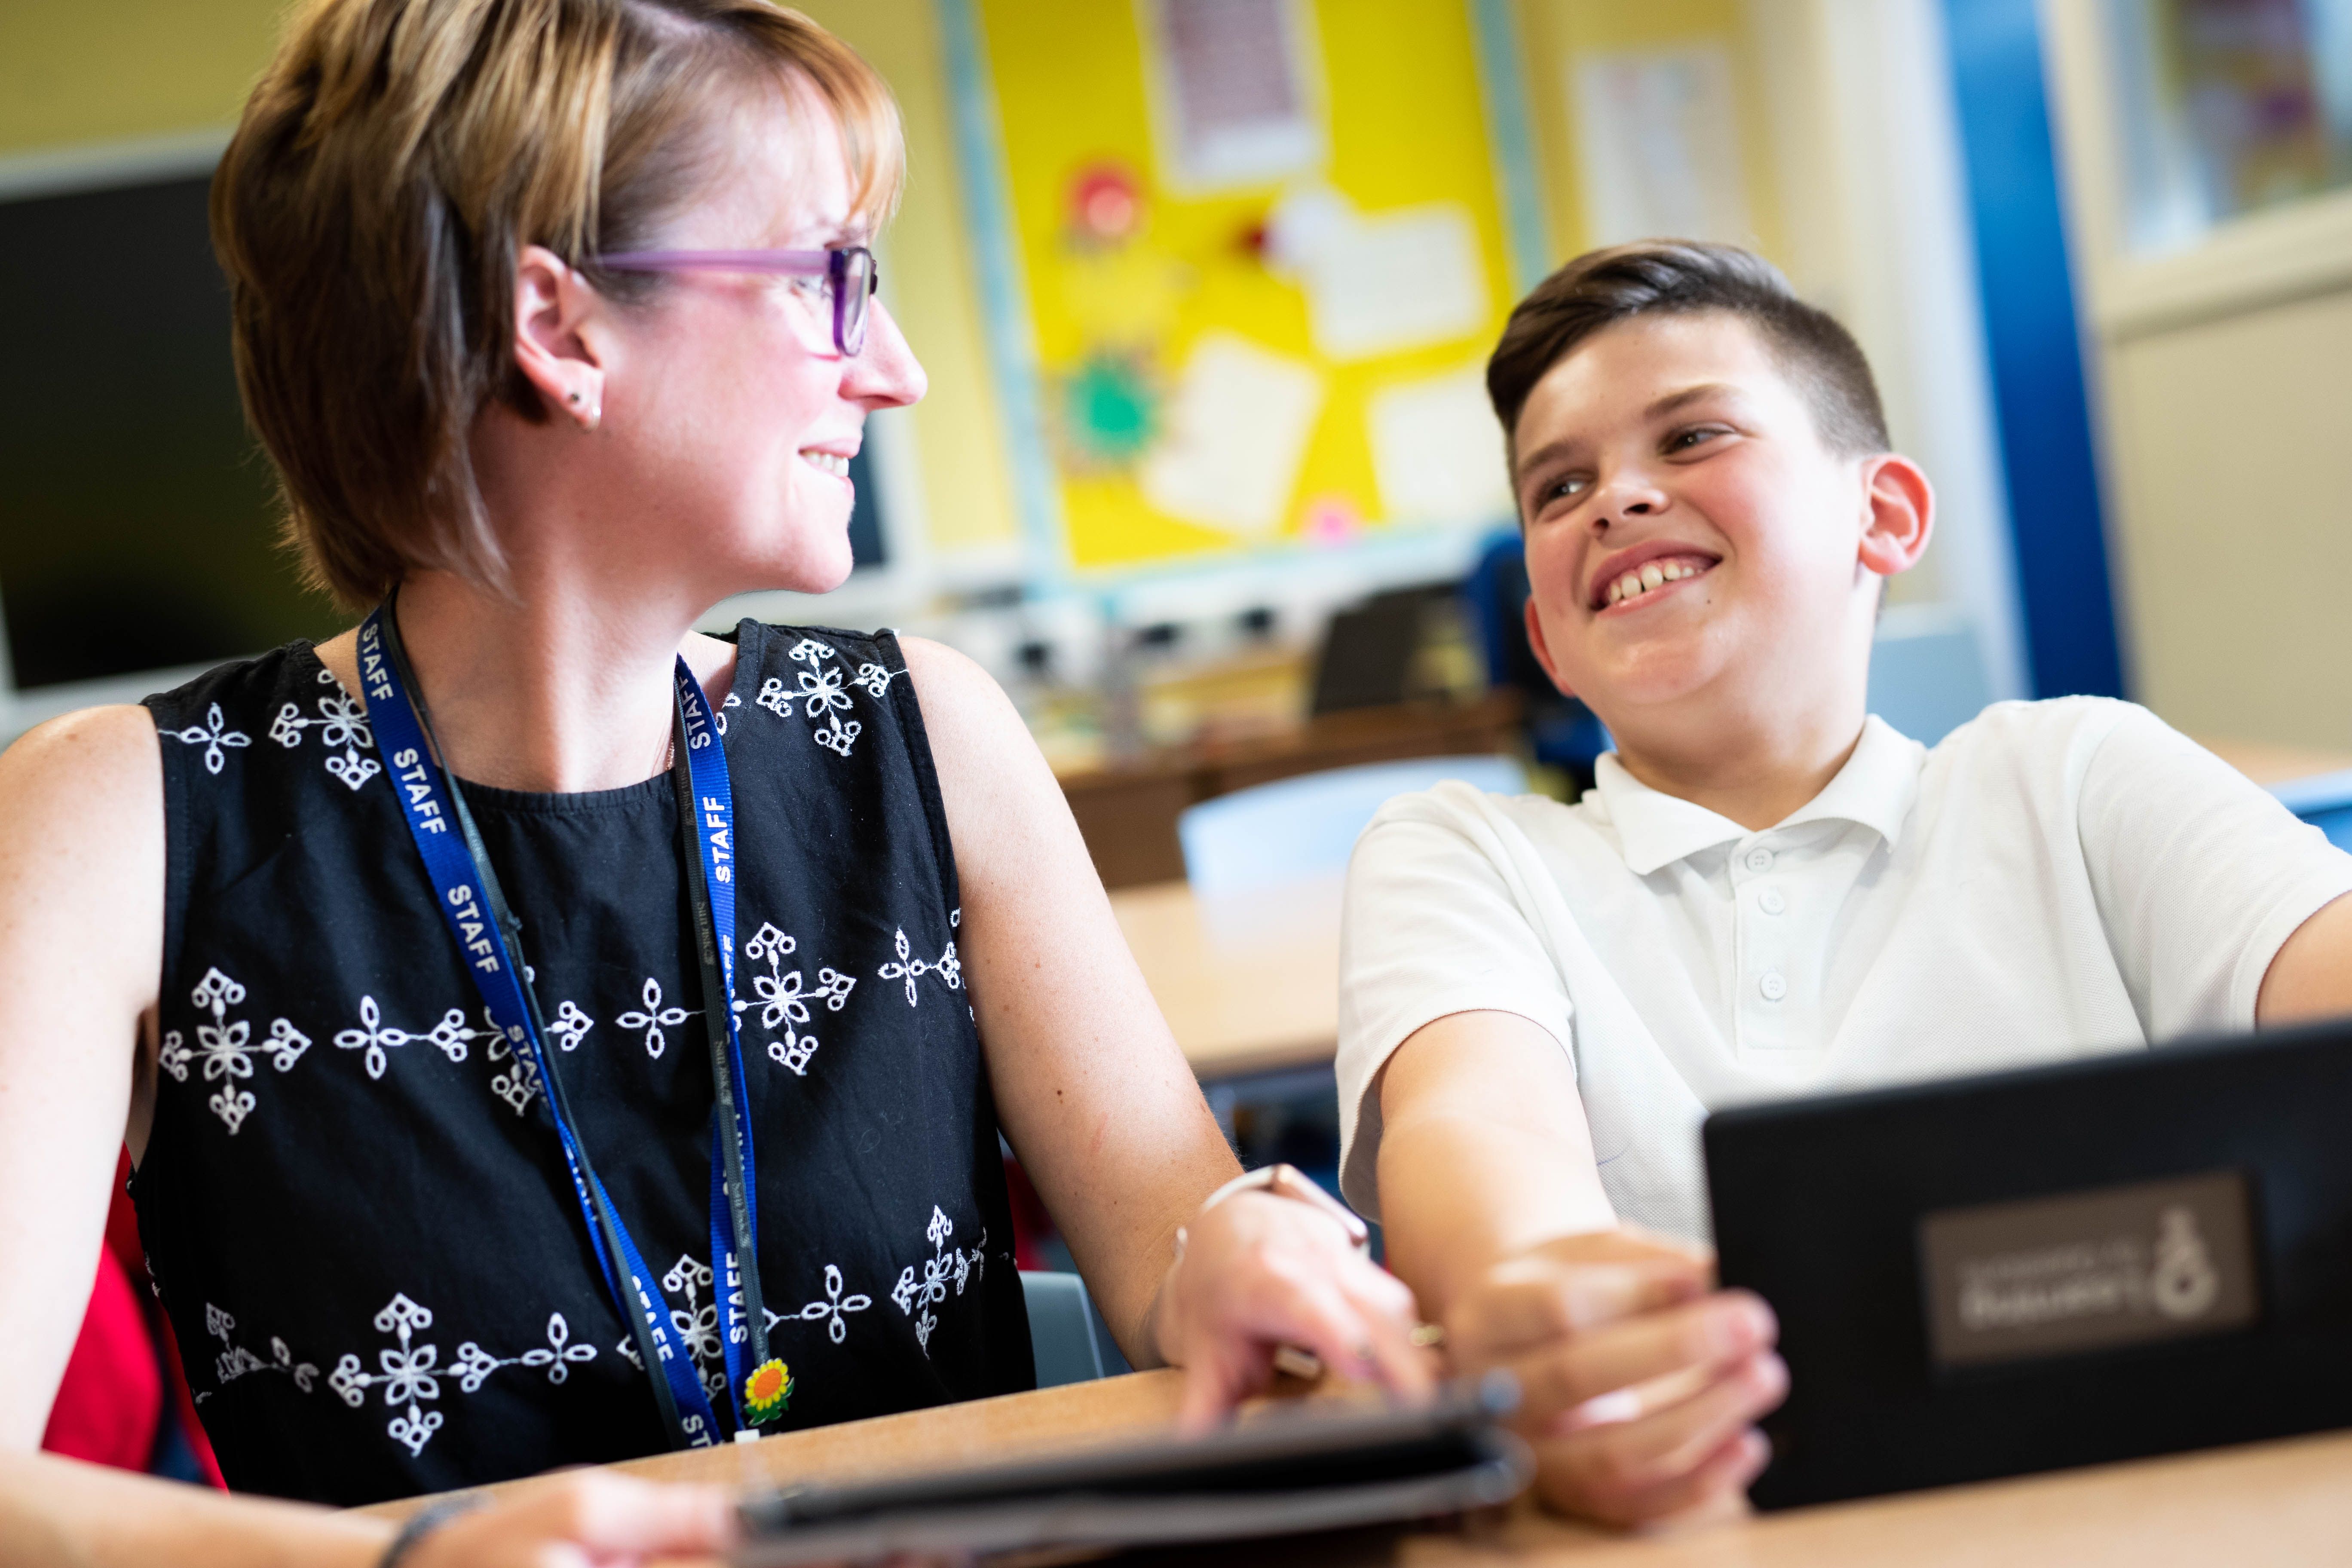 Meet the DfE Remote Learning Expectations with LbQ!